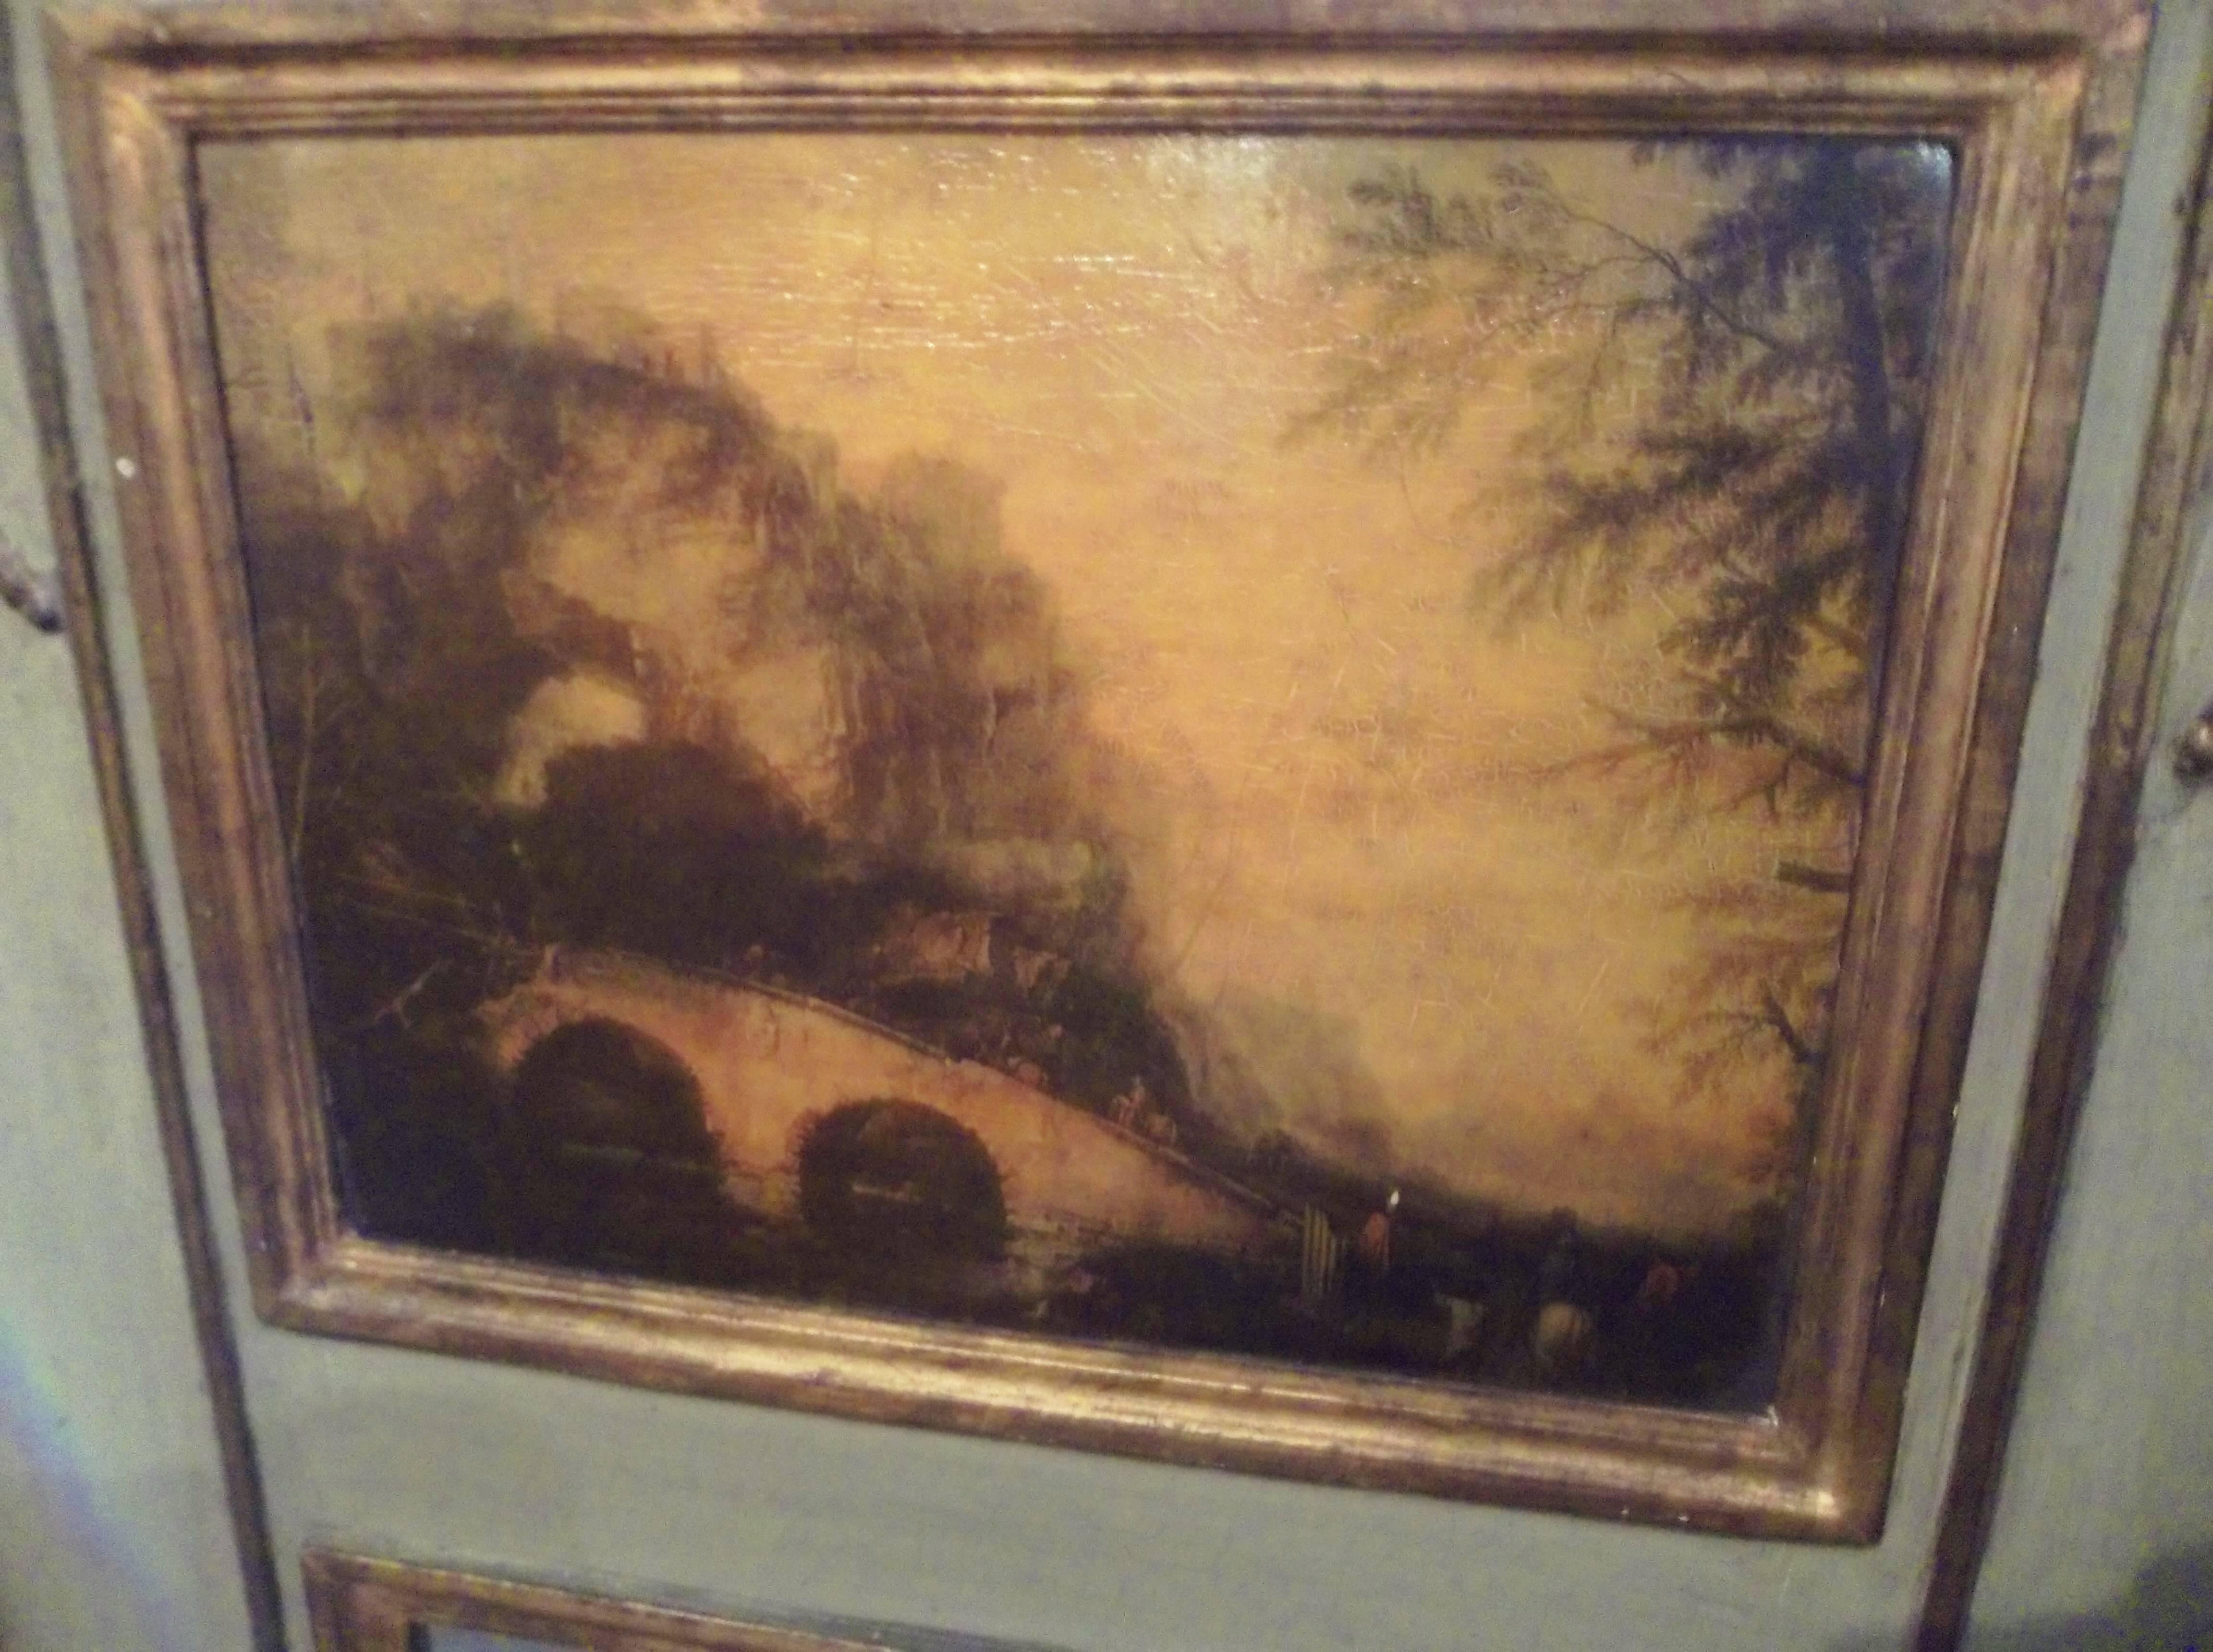 The trumeaux with scenes of a landscape with bridge and a harbor scene (possibly Venice). Gilt decoration against a nicely worn and dusty green ground. Peg construction. Bleeding of red bole through the gilding. 

Typical oxidation and wear to